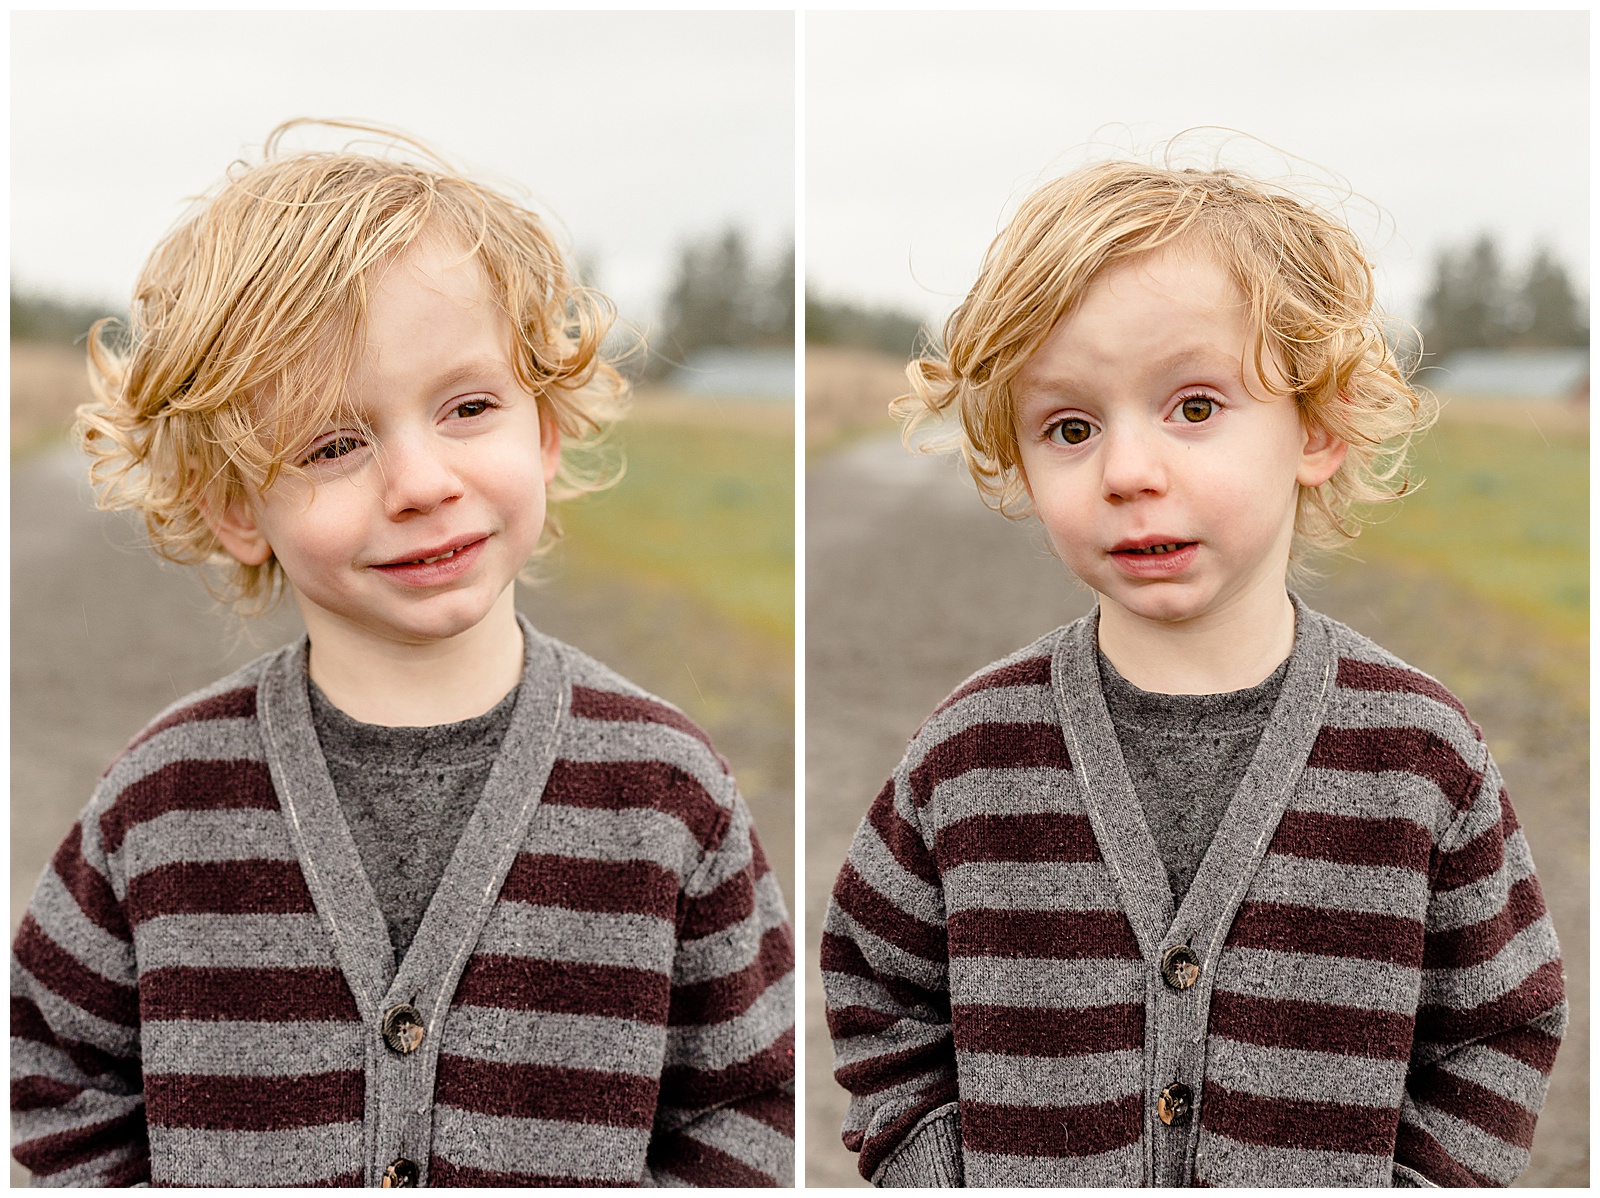 3 year old boy wearing grey and maroon sweater